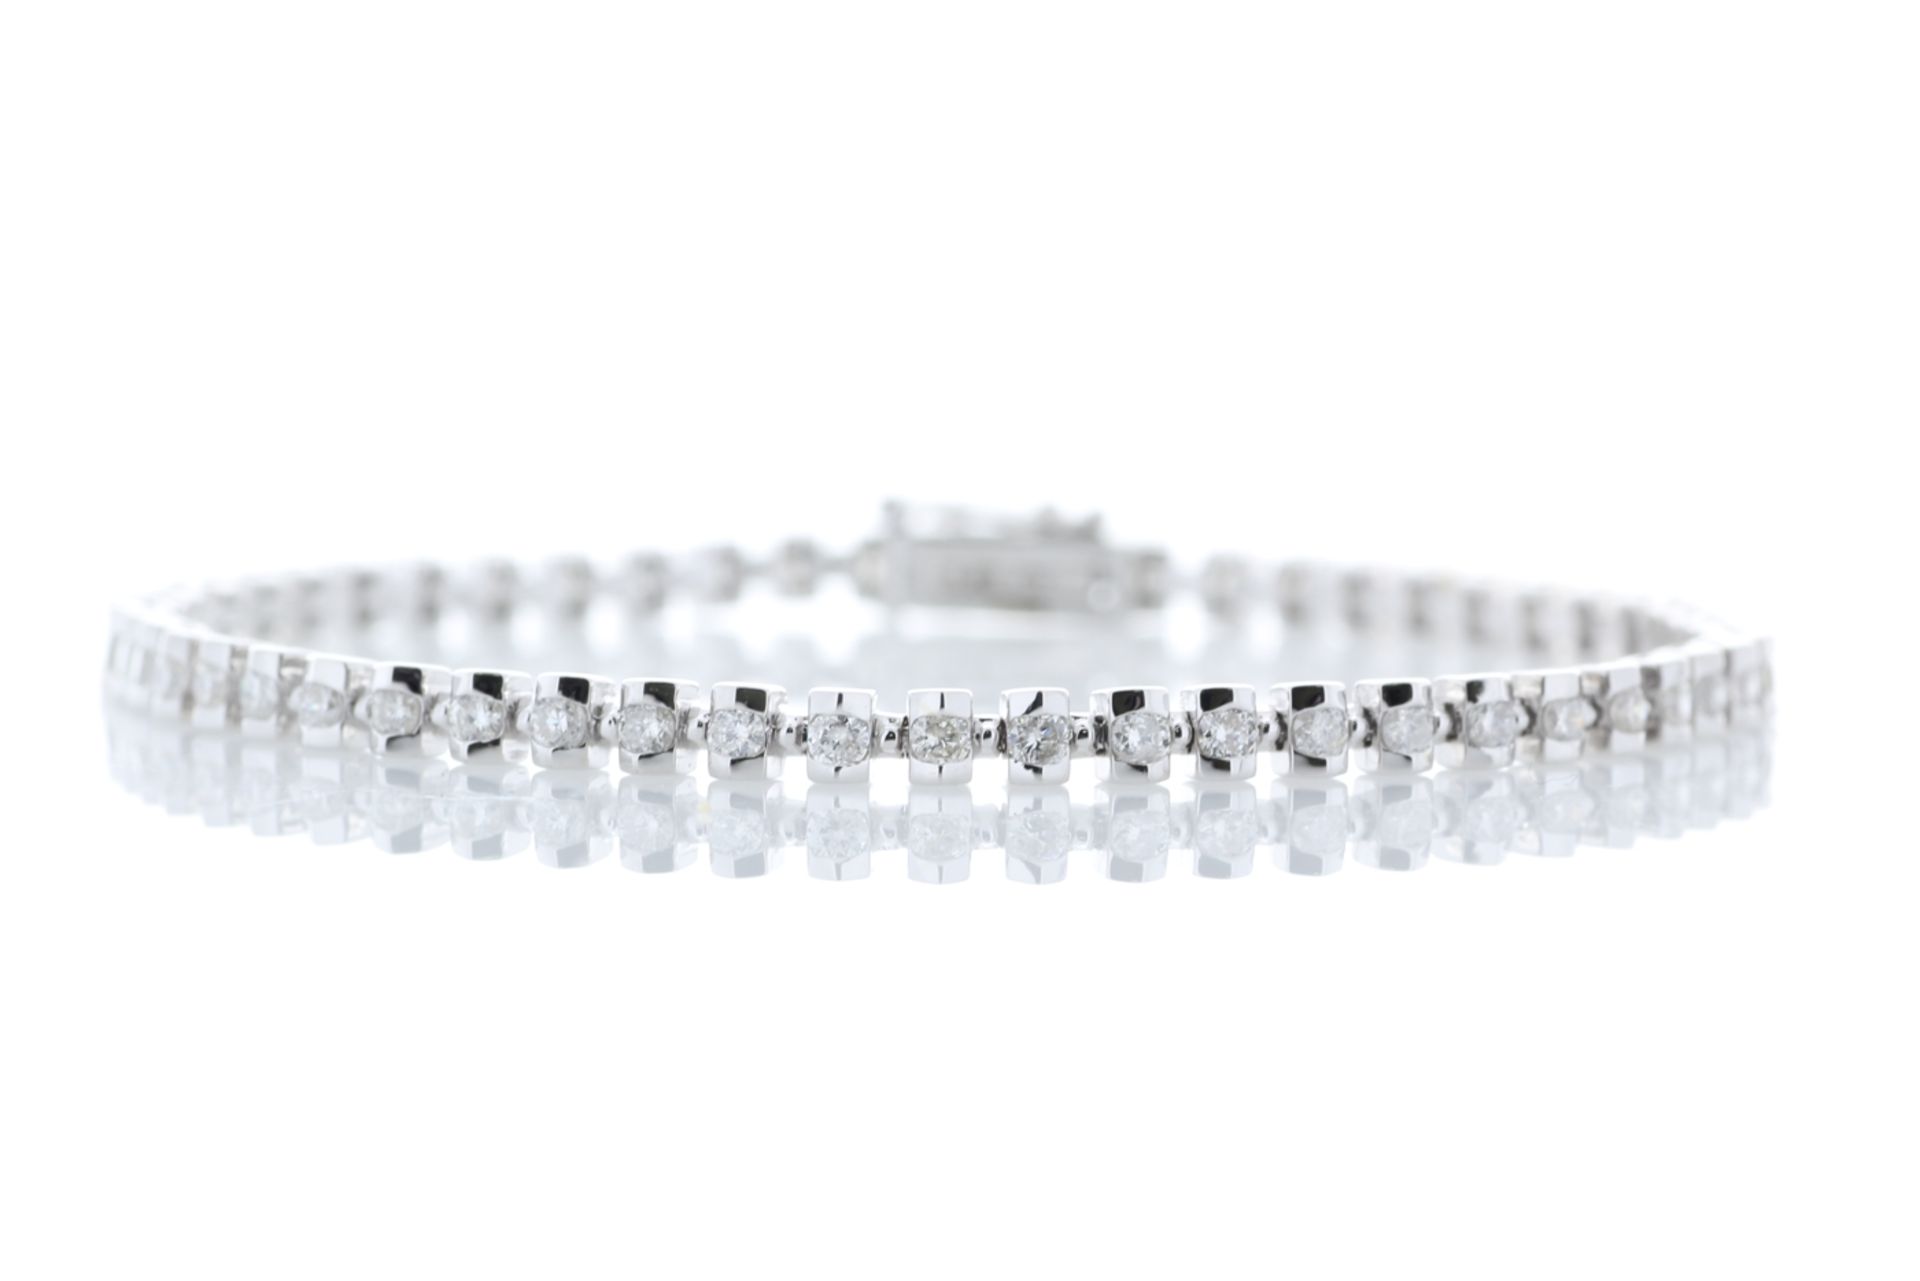 18ct White Gold Tennis Diamond Bracelet 1.82 Carats - Valued By GIE £13,155.00 - Fifty five round